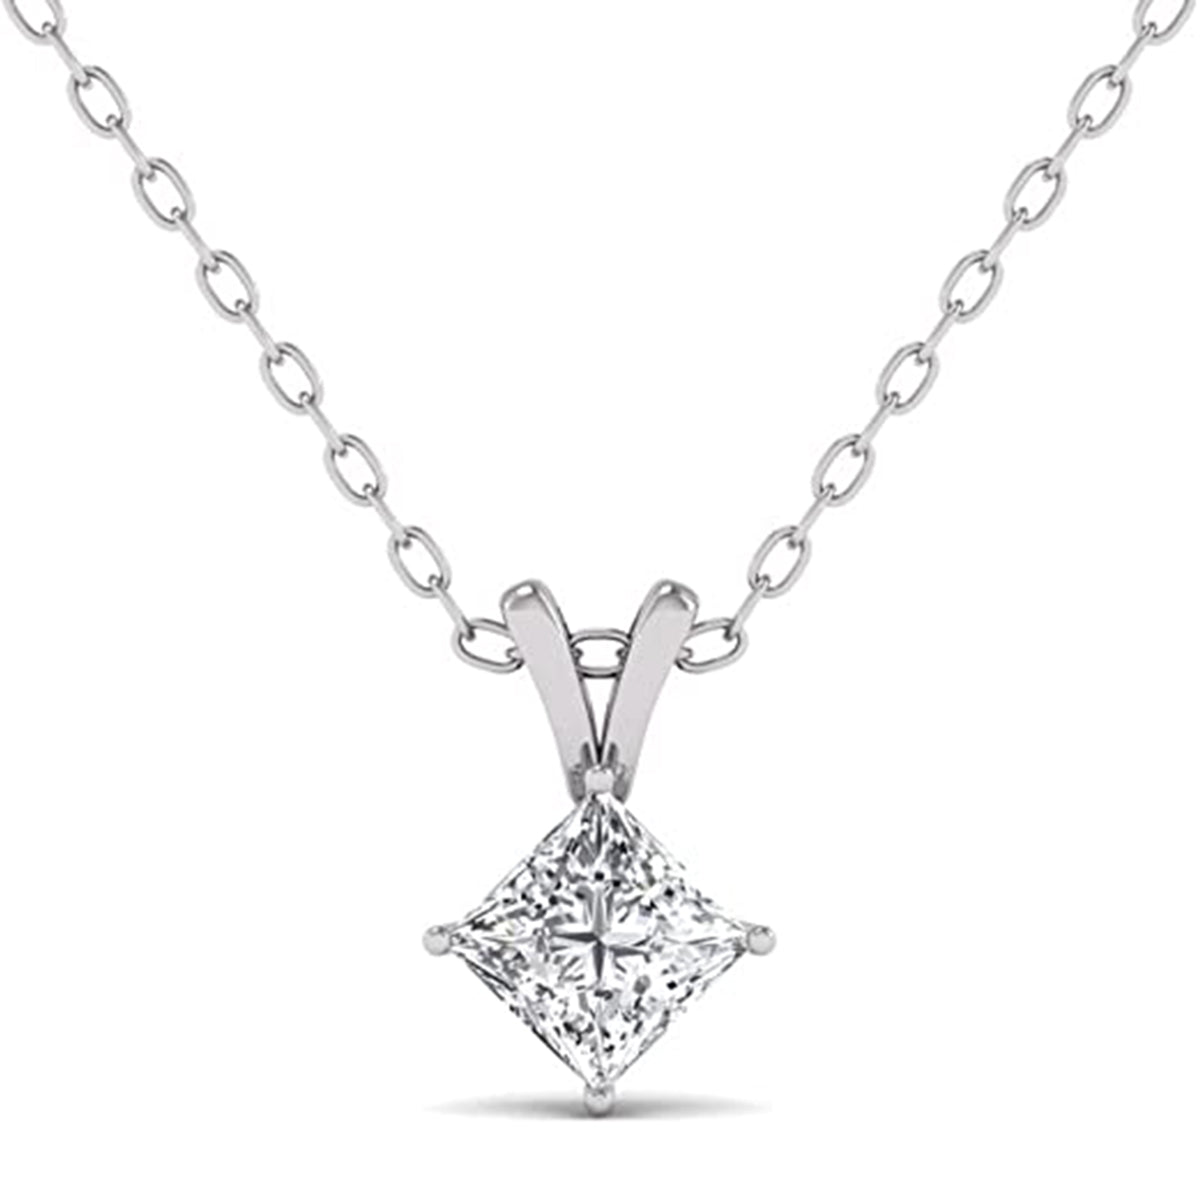 1/3 CARAT TW Princess Cut Natural Diamond 4-Prong Solitaire Pendant Available in 14K White Gold (J-K Color, I2-I3 Clarity)